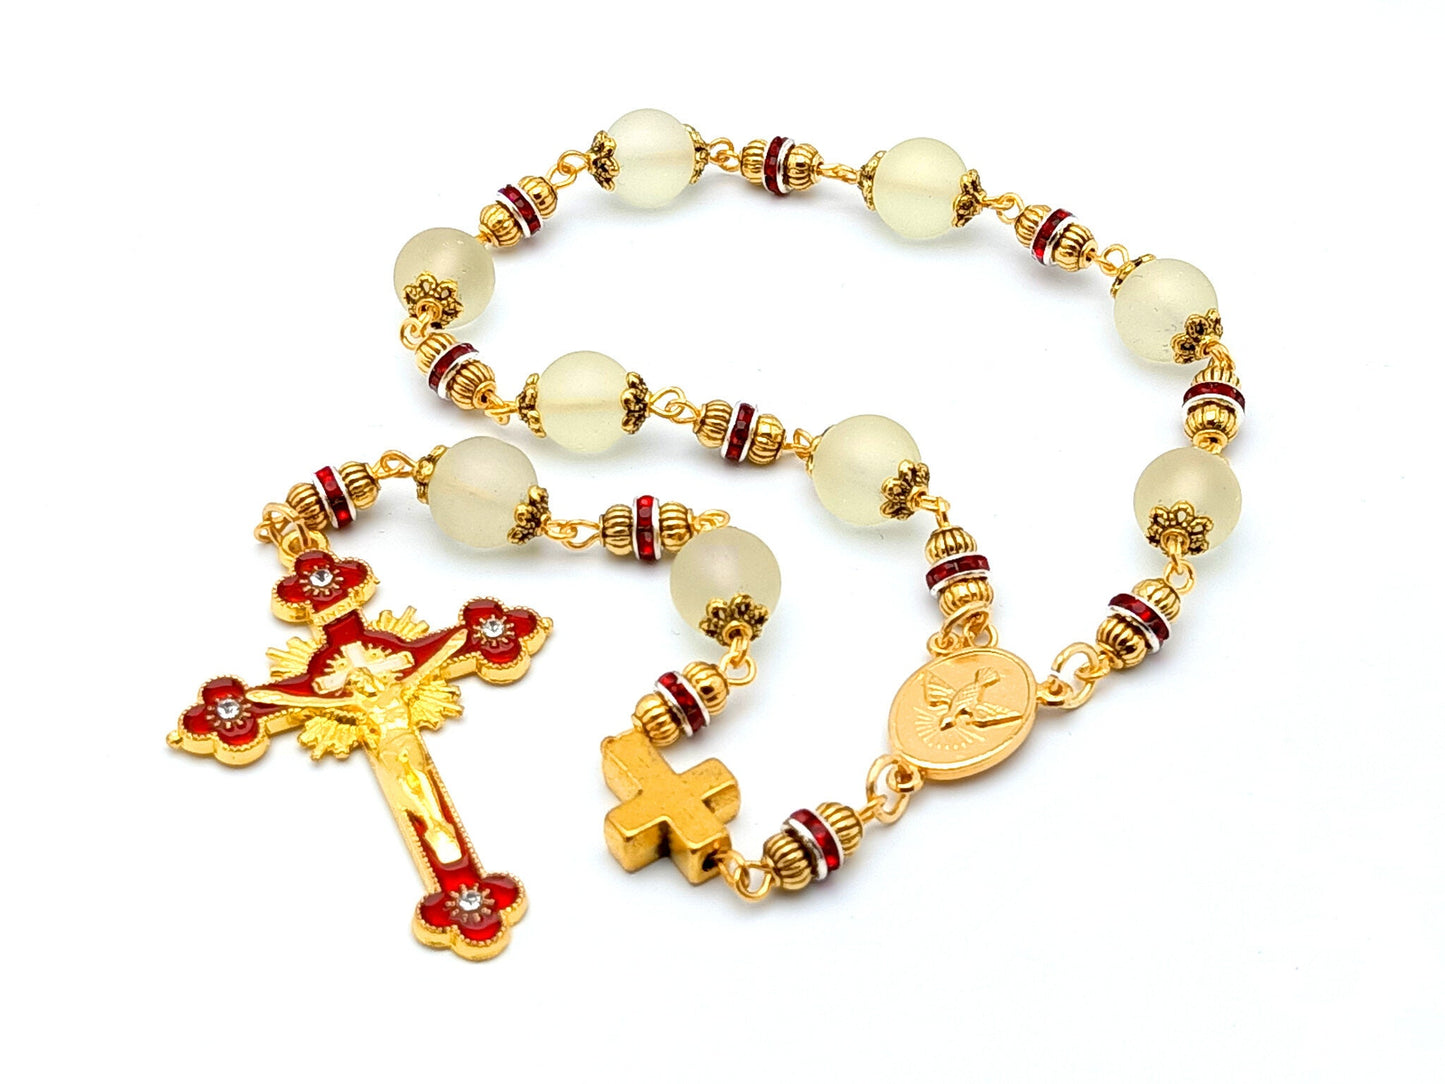 Holy Spirit unique rosary beads prayer chaplet with gold and red glass beads, gold and red emanel crucifix and gold centre medal.